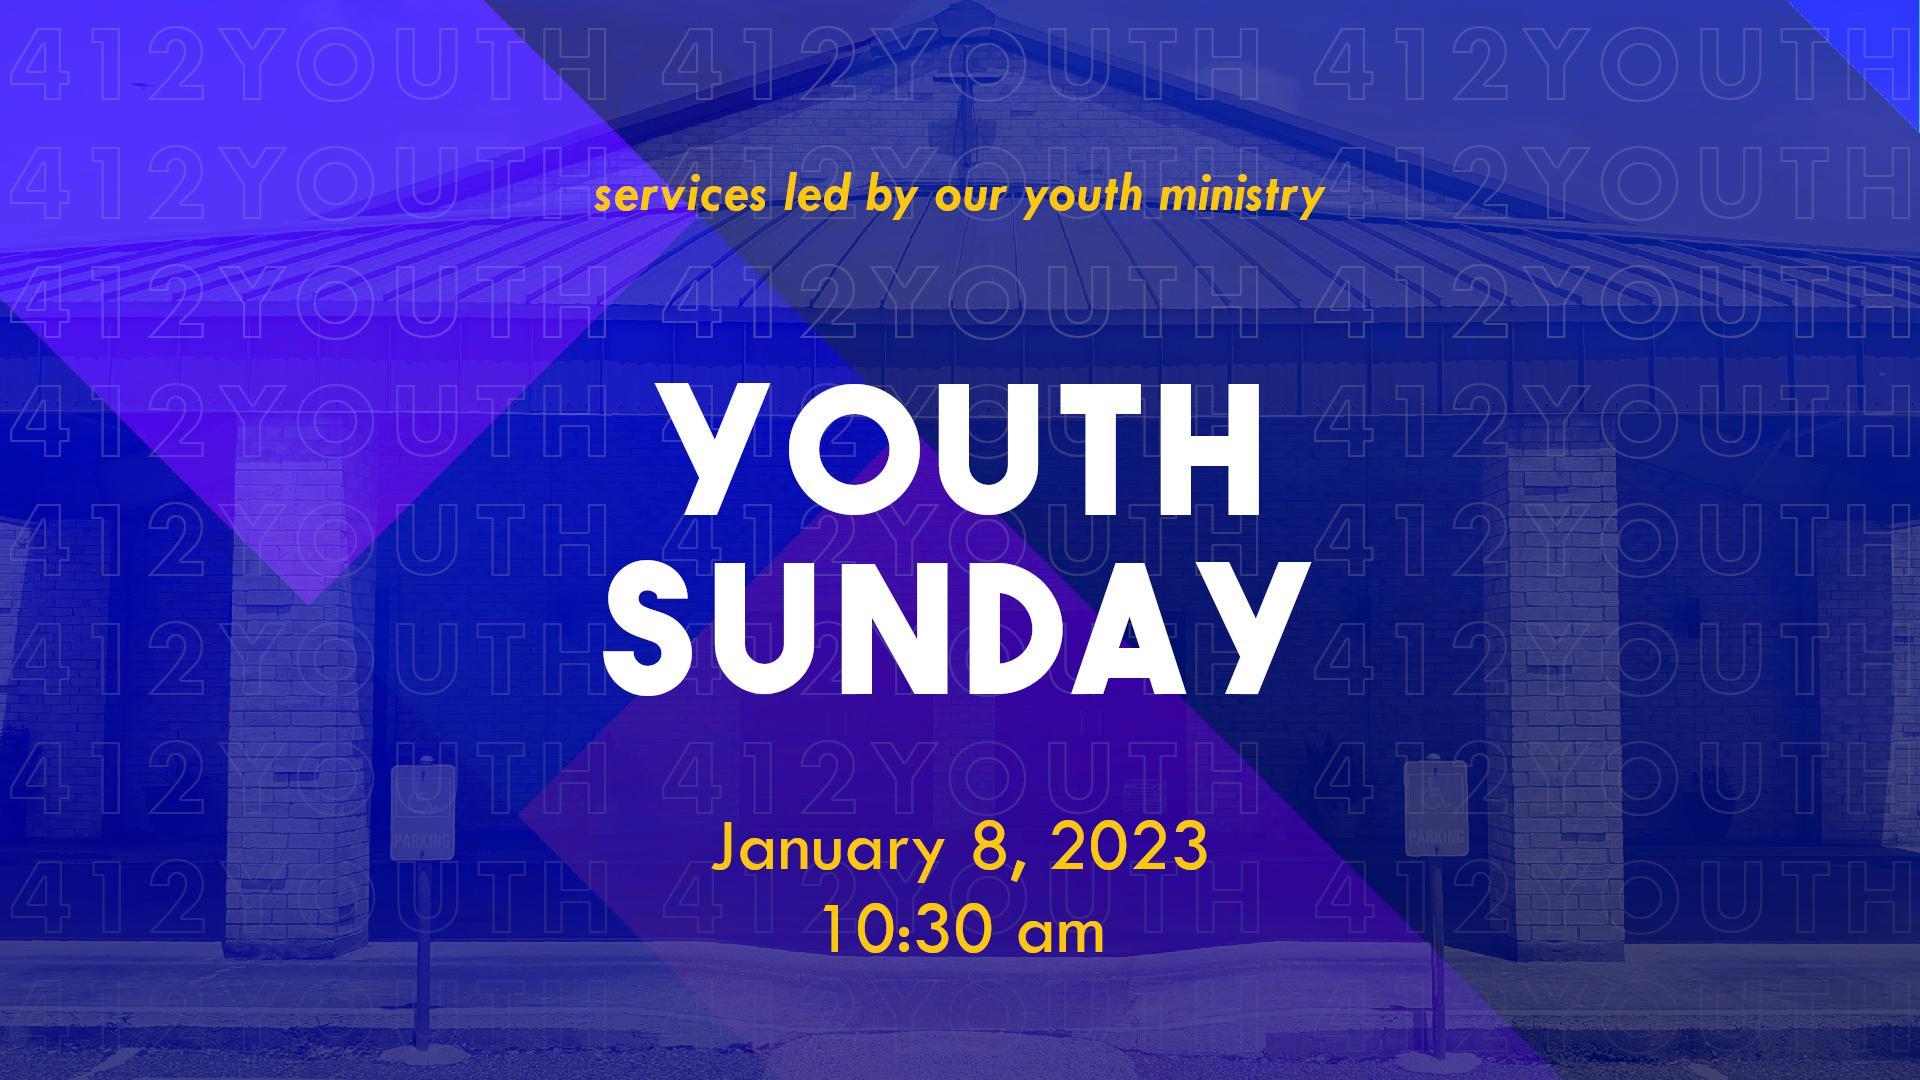 Youth Sunday is when 412 Youth will lead Sunday worship on January 8, 2023